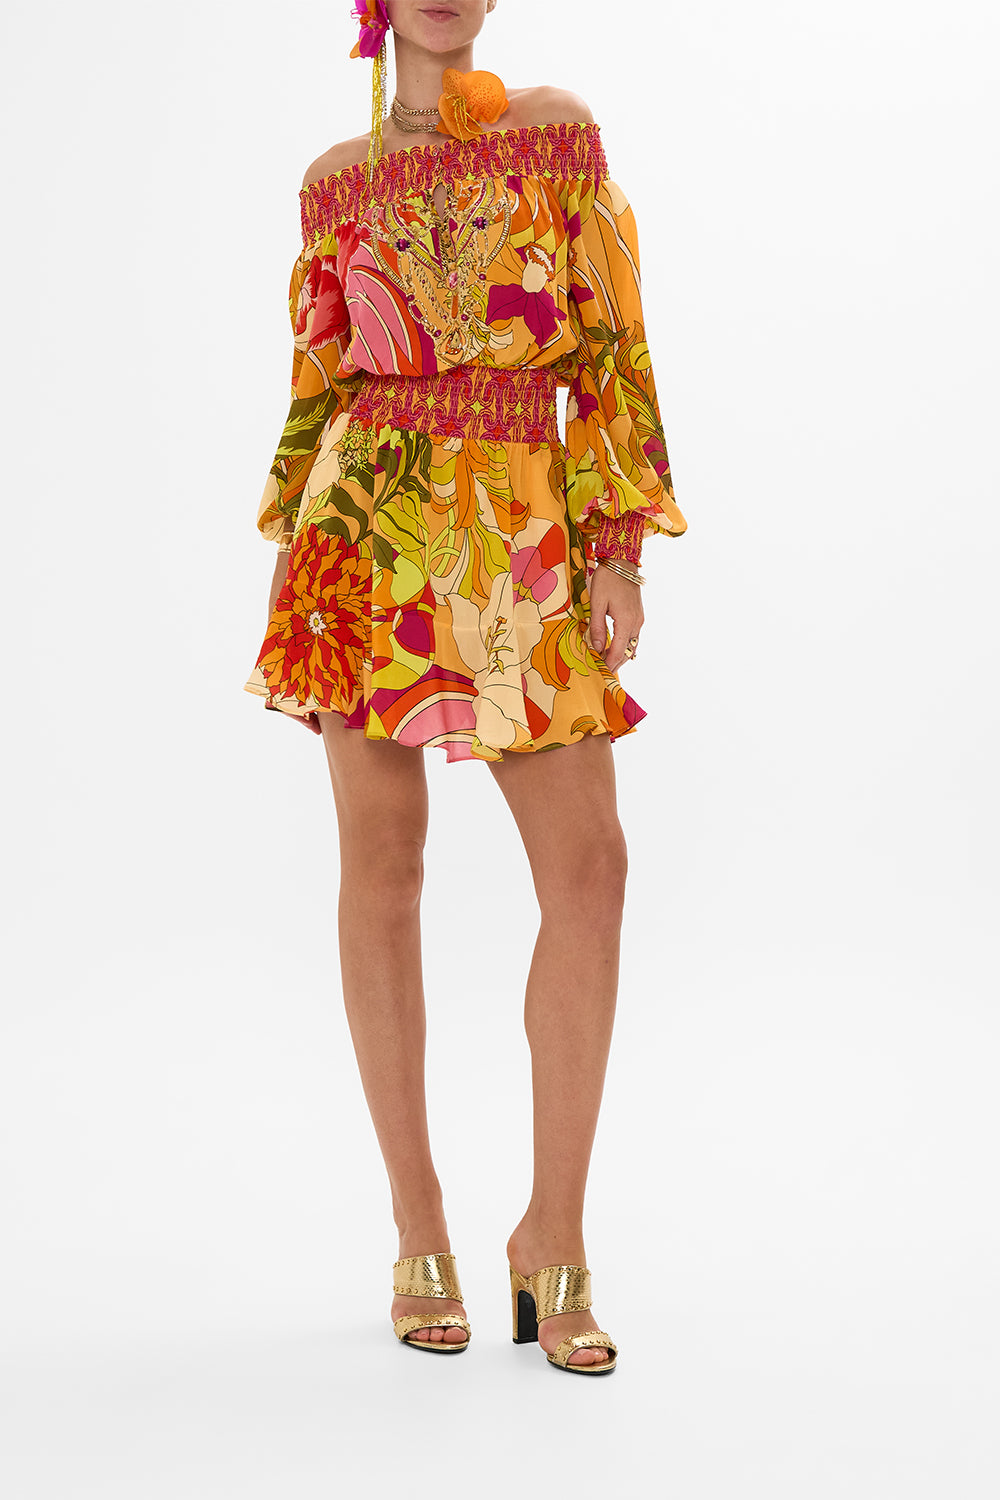 CAMILLA Floral Off Shoulder Short Dress in The Flower Child Society print